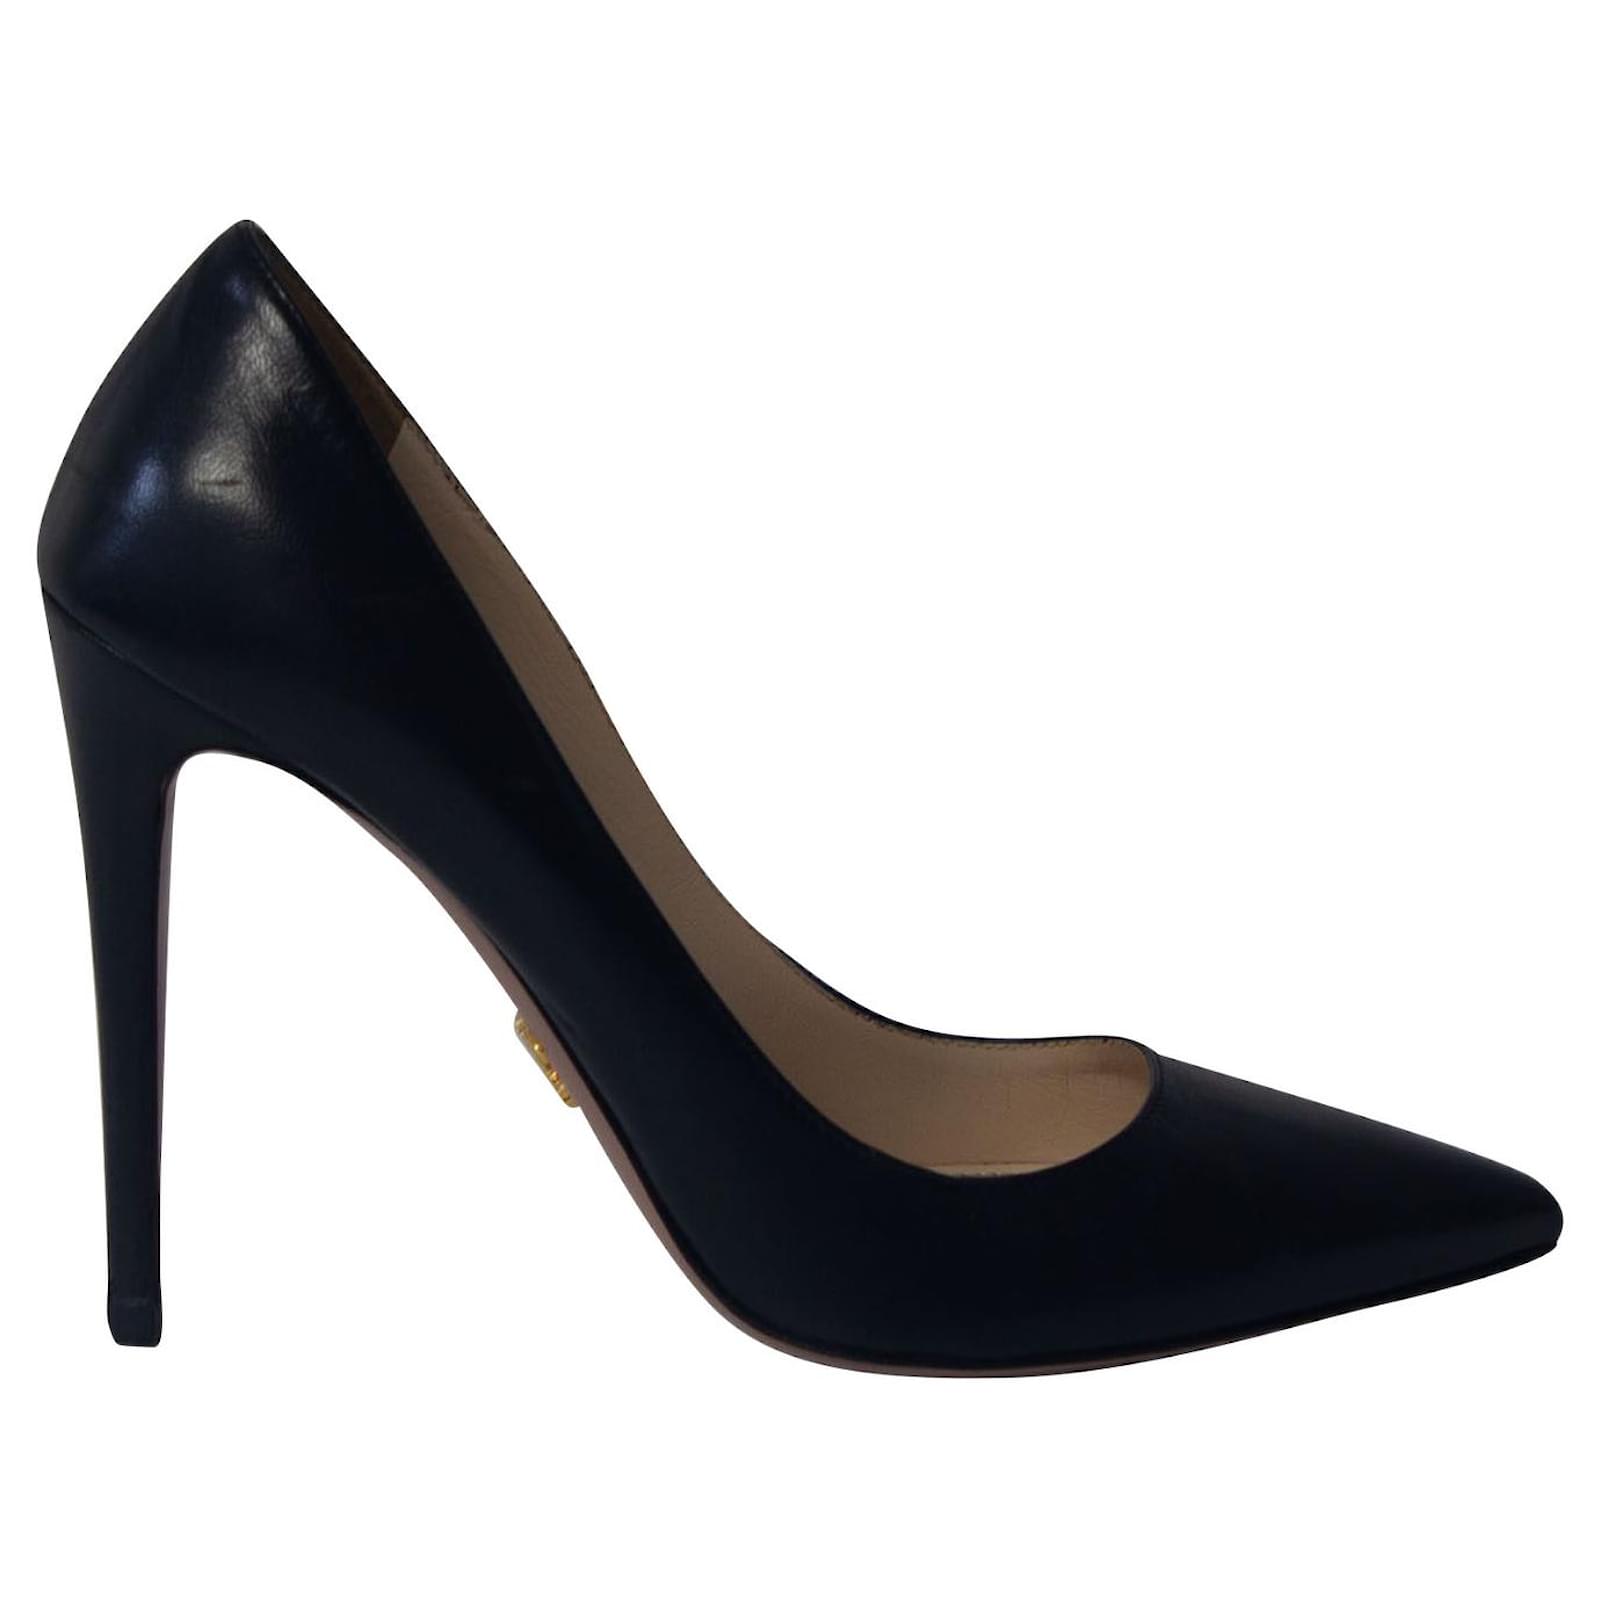 Prada Pointed Toe Pumps in Black Leather